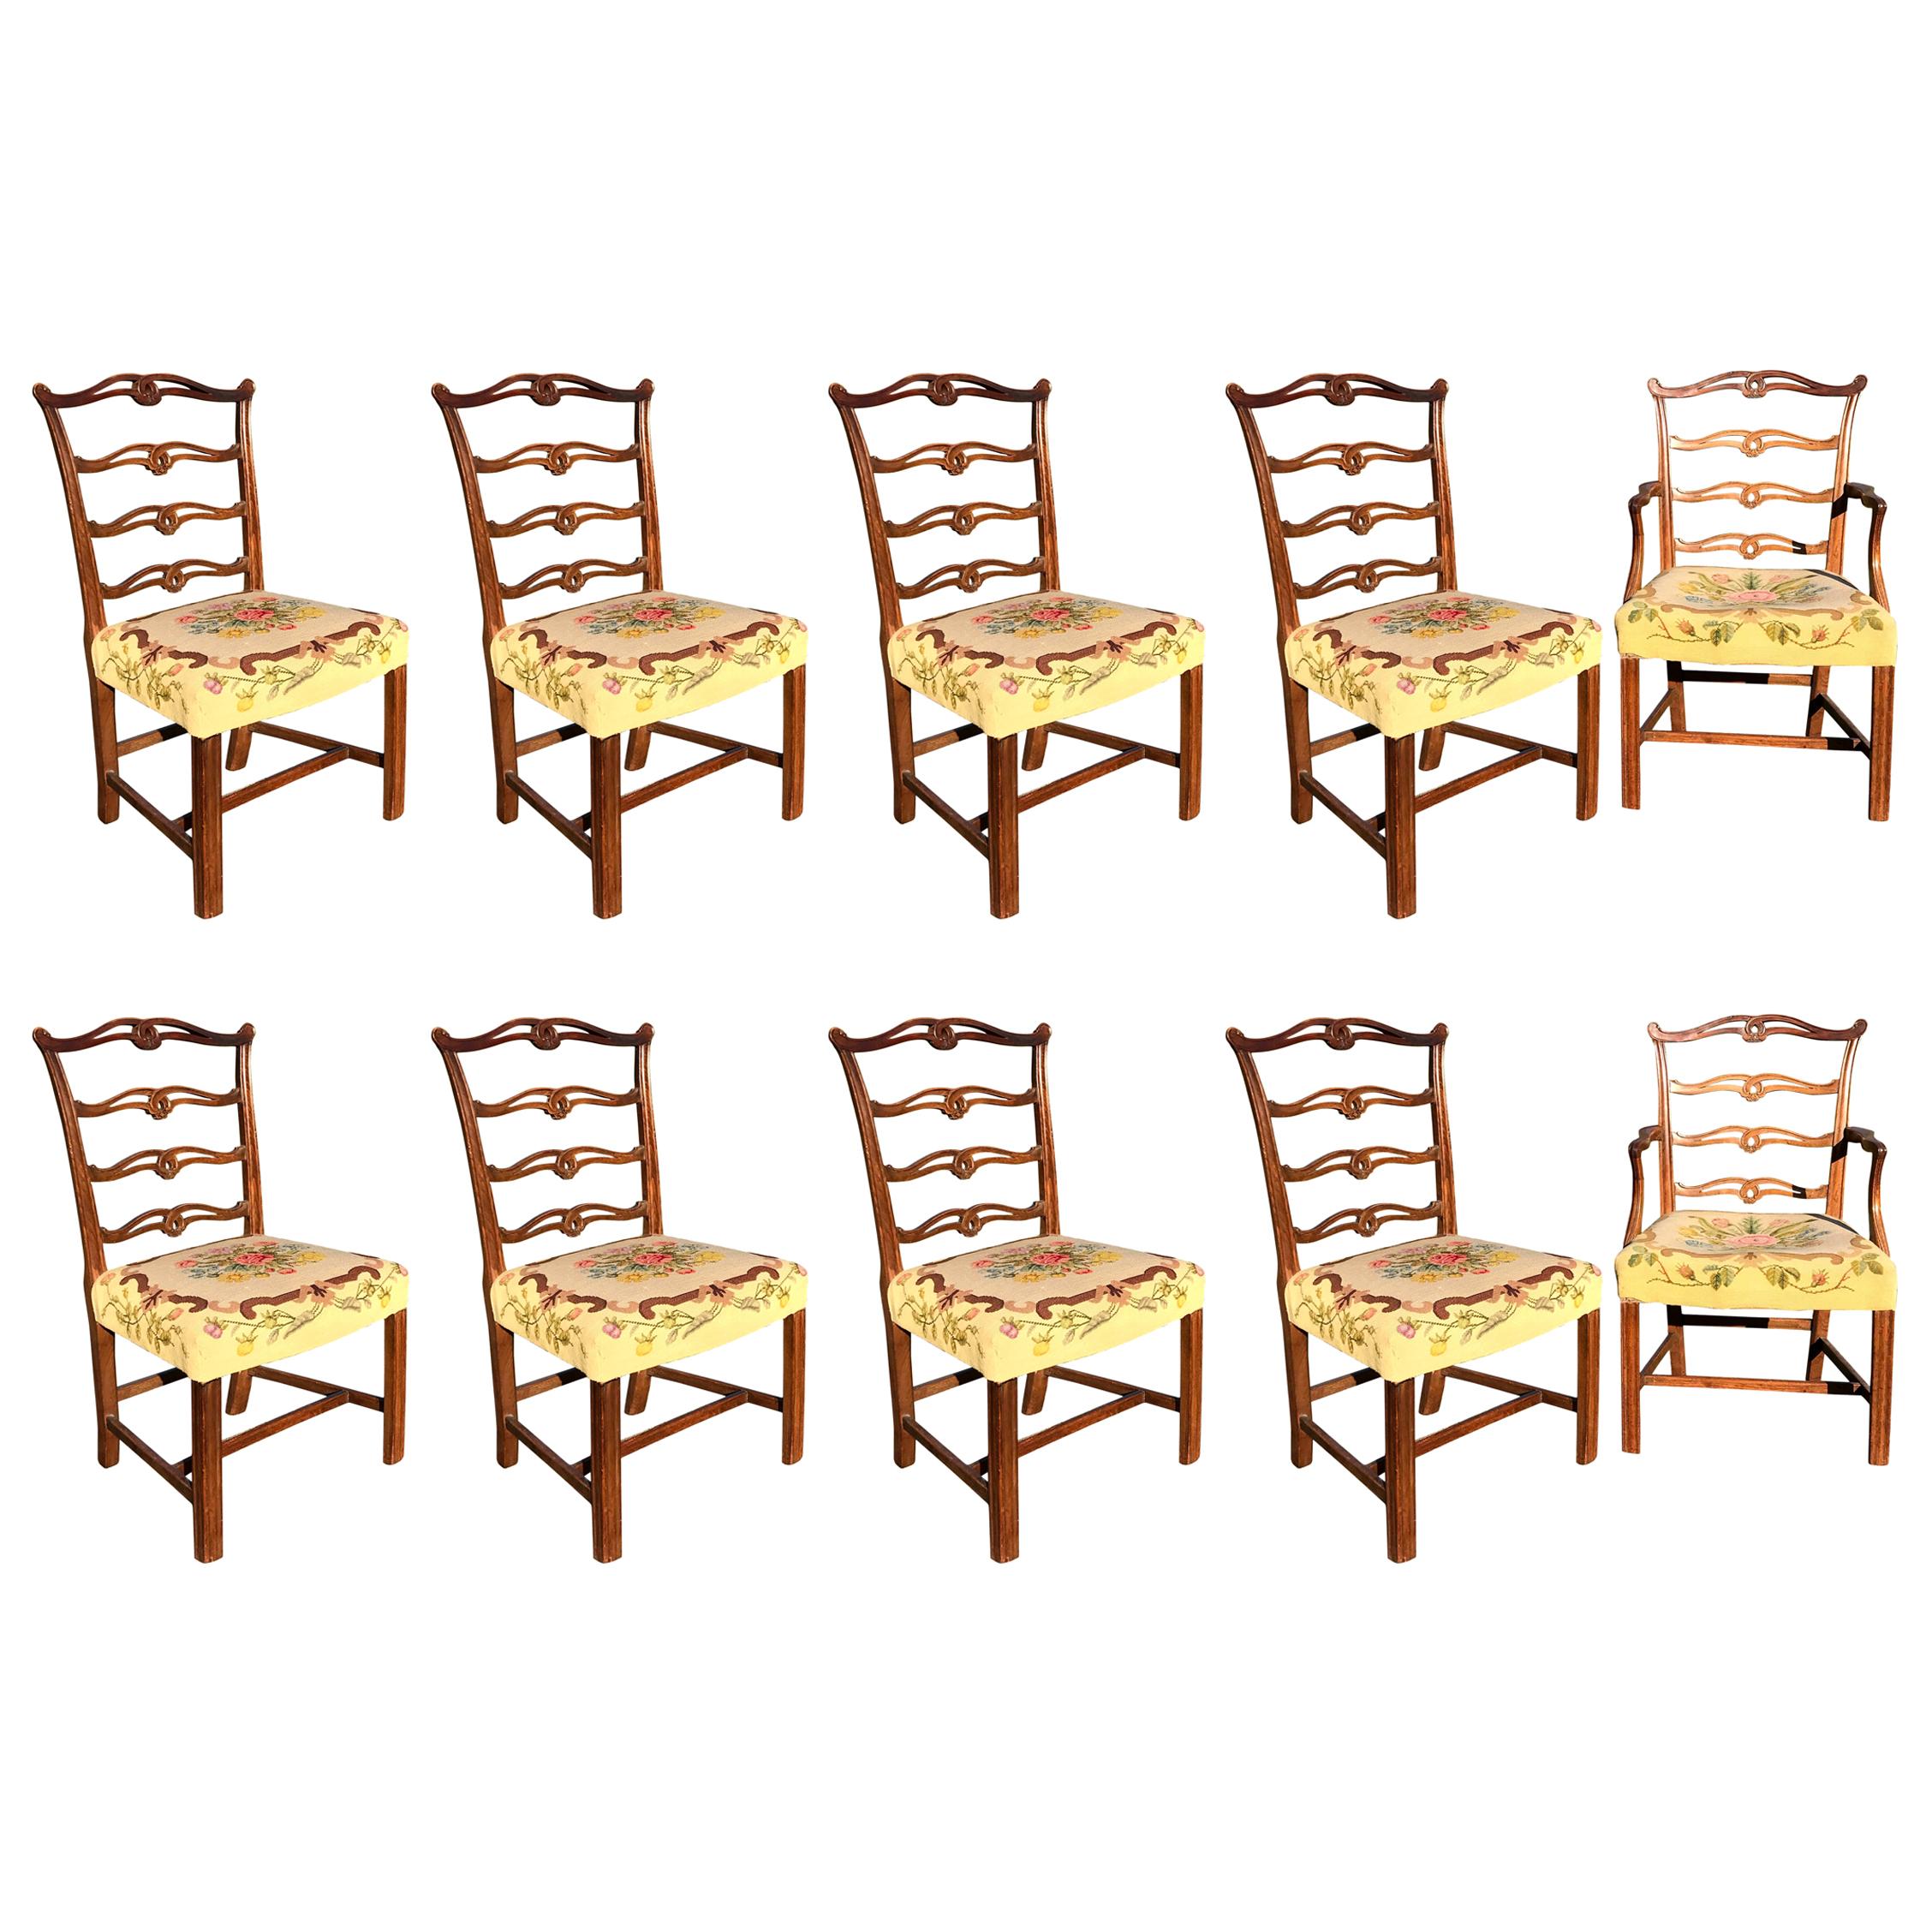 Set 10 Chippendale Mahogany Dining Chairs, circa 1770